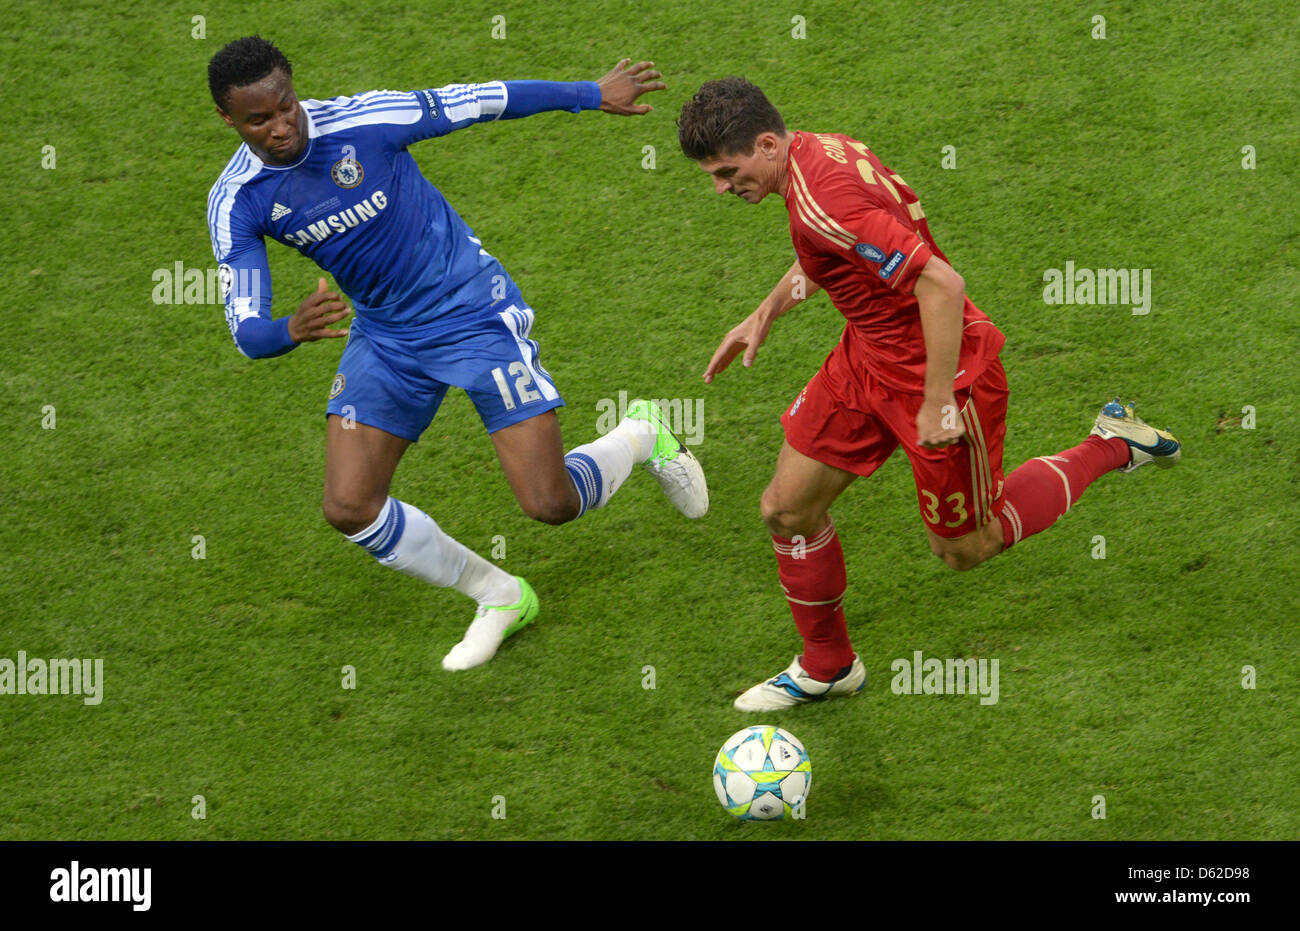 Munich's Mario Gomez (R) and Chelsea's John Obi Mikel vie for the ball during the UEFA Champions League soccer final between FC Bayern Munich and FC Chelsea at Fußball Arena München in Munich, Germany, 19 May 2012. Photo: Peter Kneffel dpa/lby Stock Photo